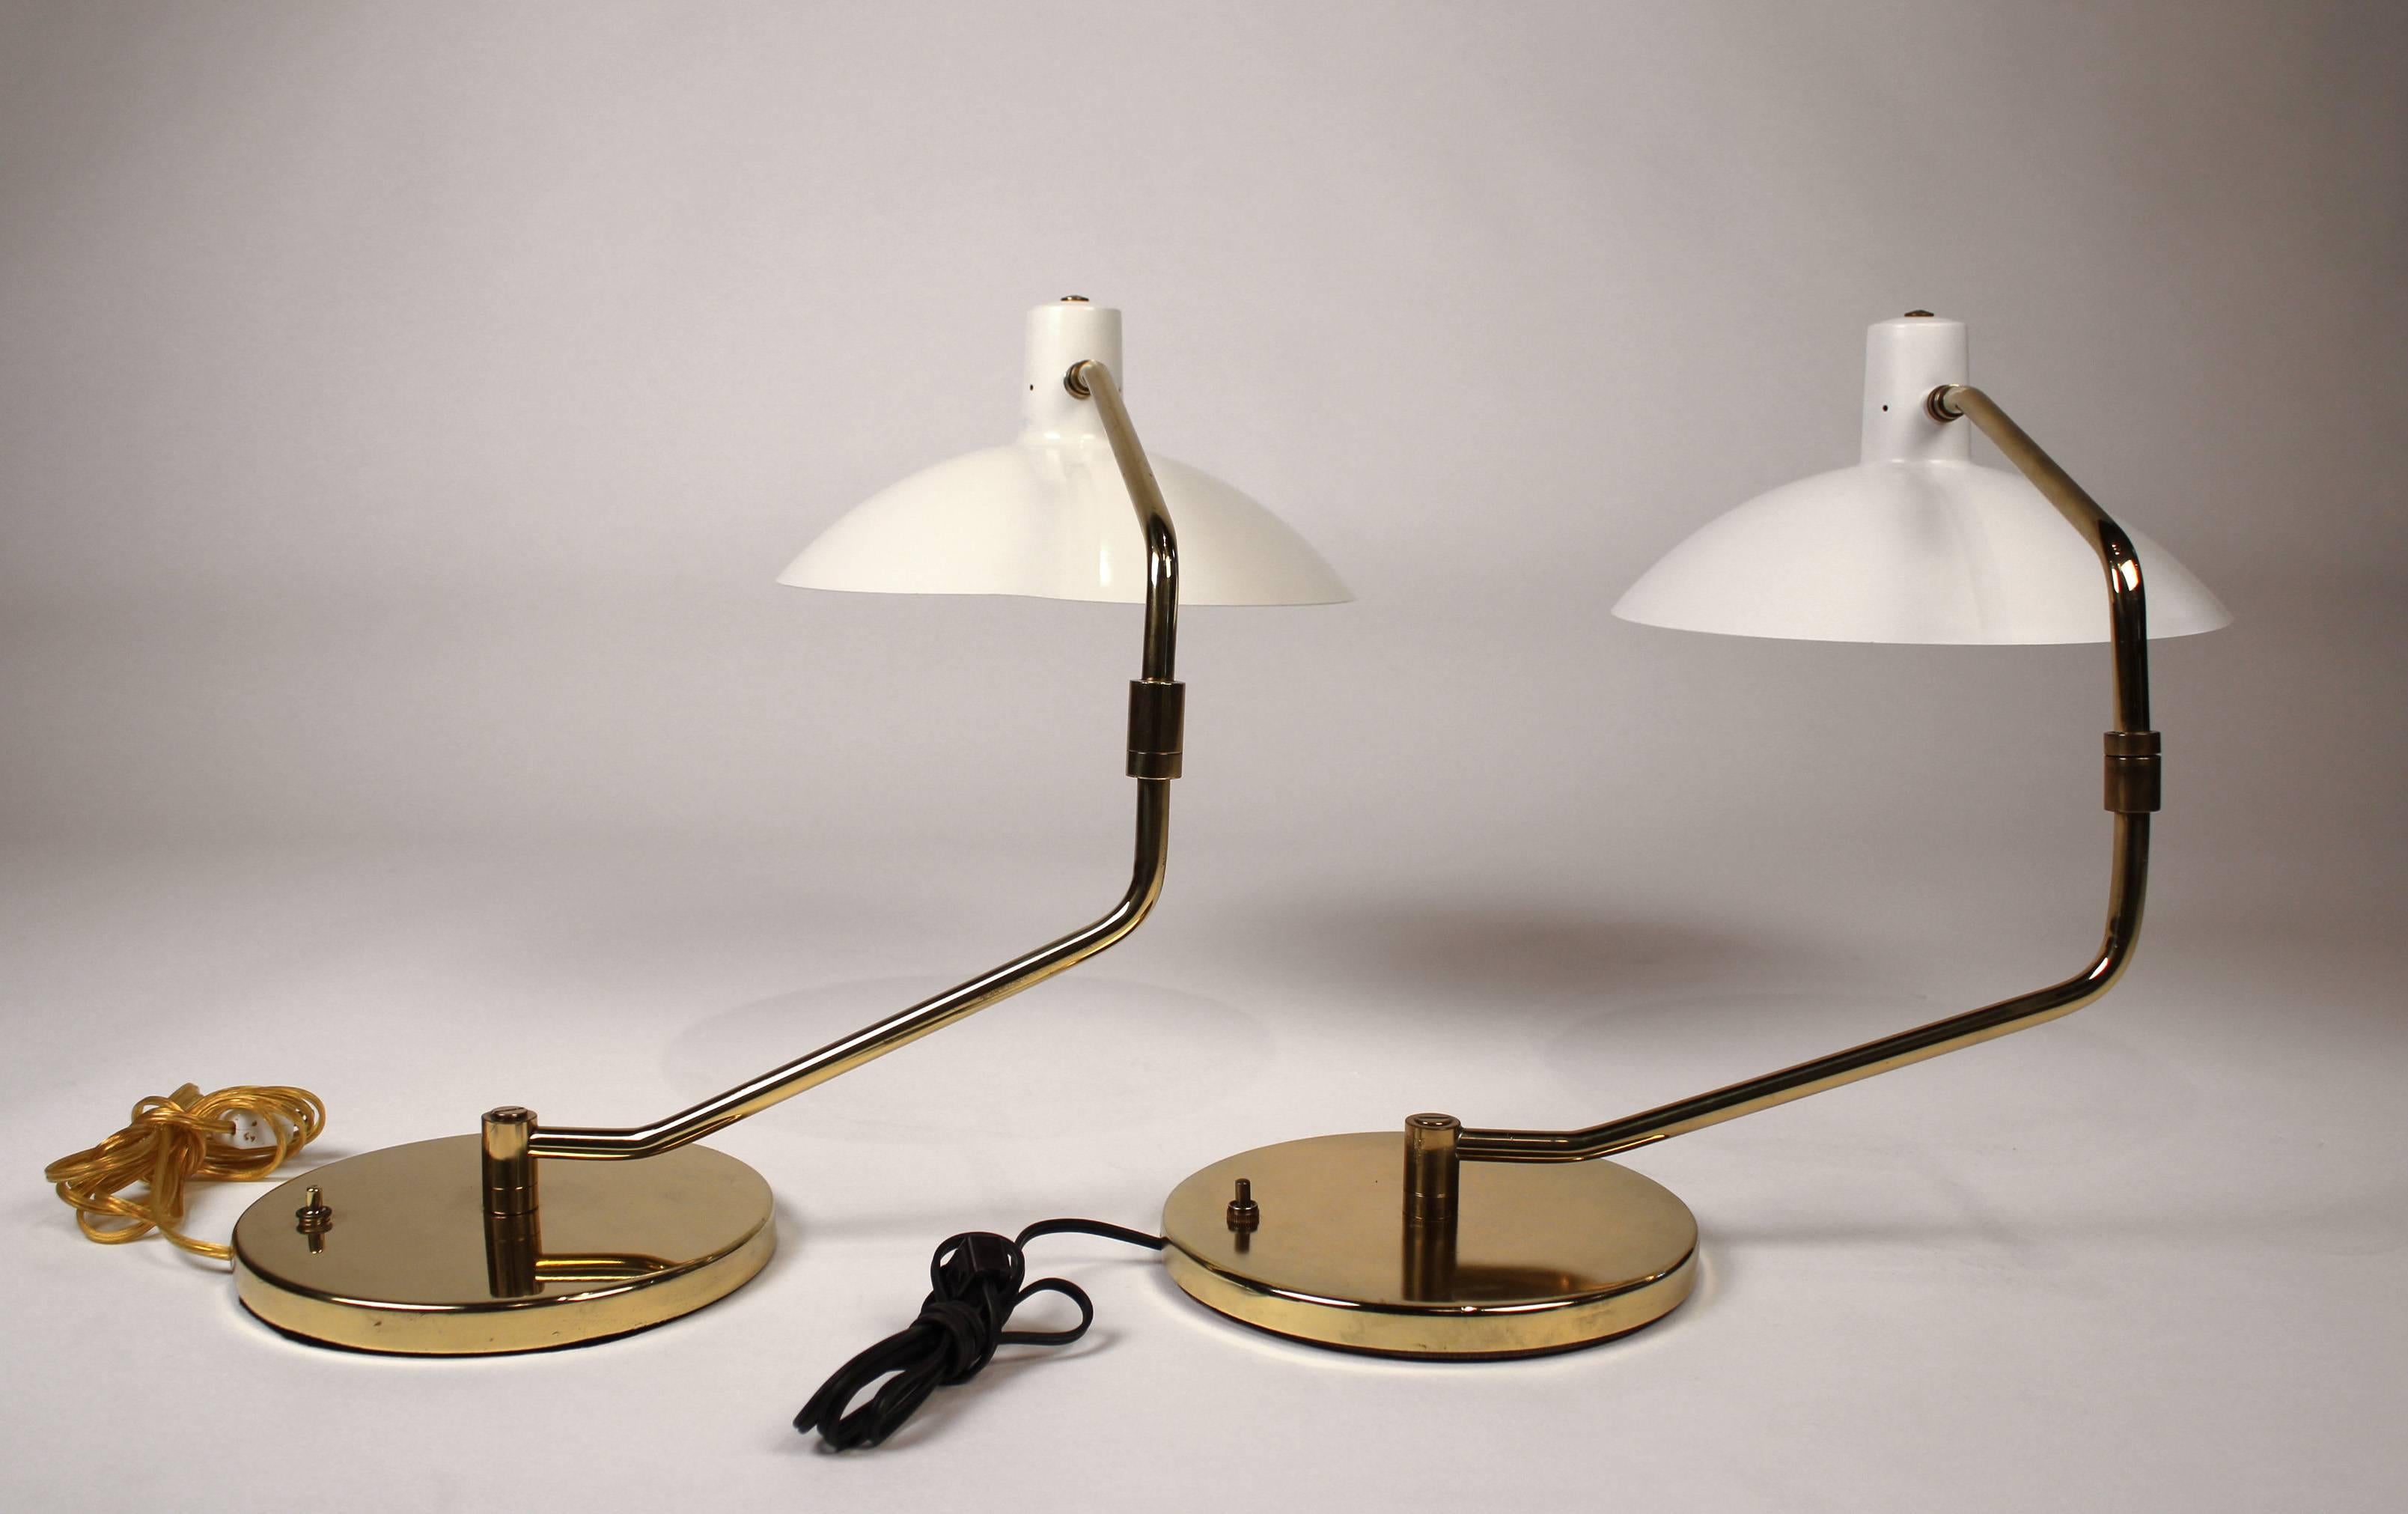 Pair of Brass Pivoting Table Lamps designed by Clay Michie for Knoll 1